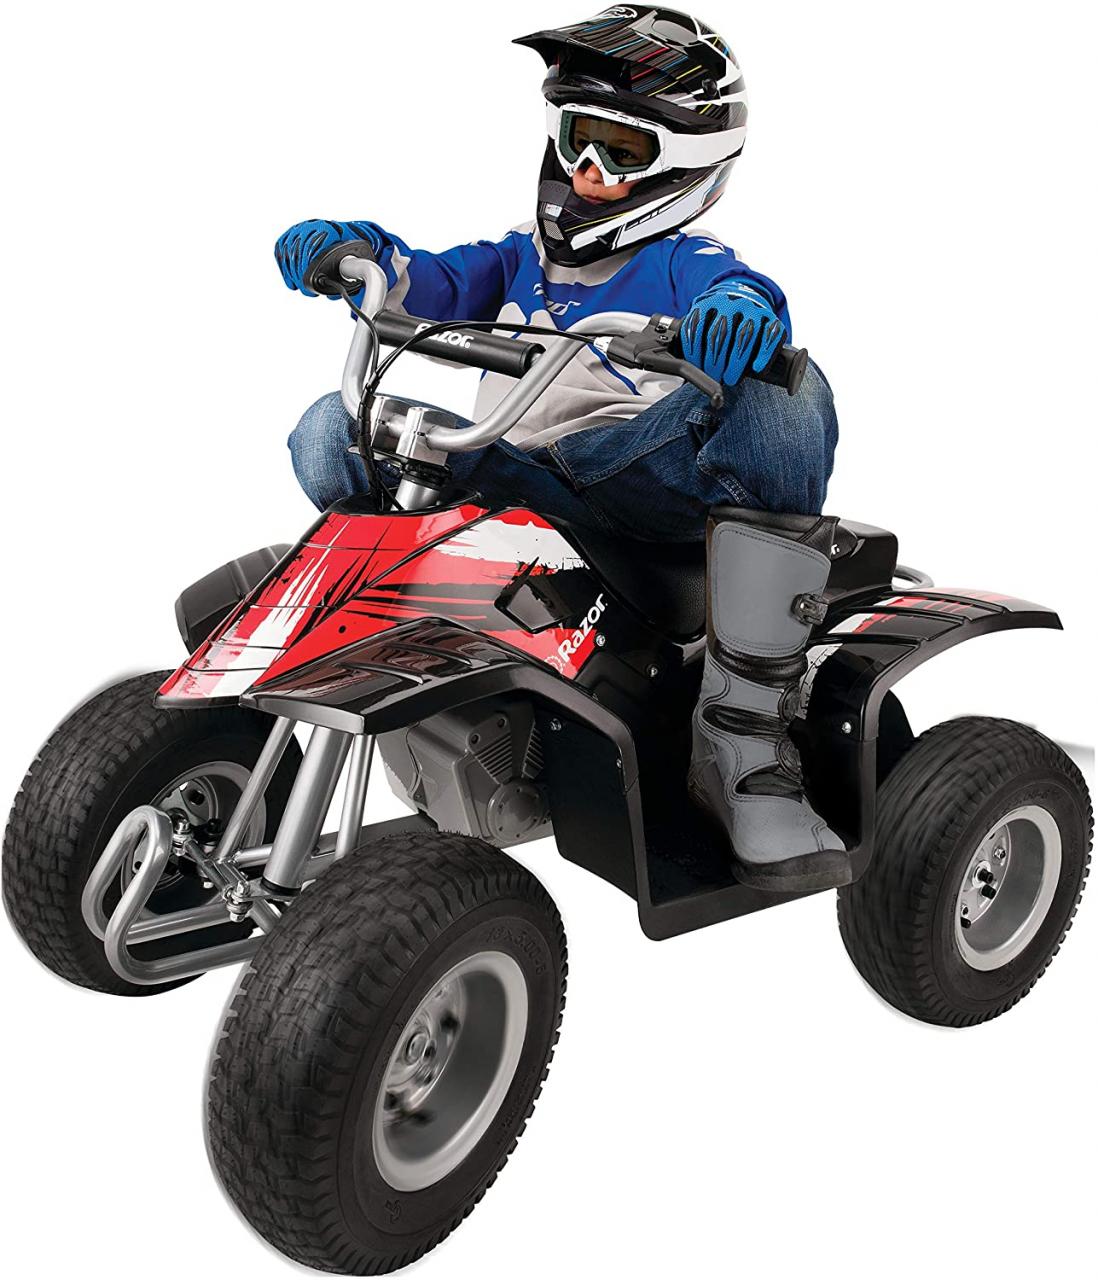 Buy Razor Dirt Quad - 24V Electric 4-Wheeler ATV - Twist-Grip  Variable-Speed Acceleration Control, Hand-Operated Disc Brake, 12 Knobby  Air-Filled Tires Online in Turkey. B00H4PDXAS